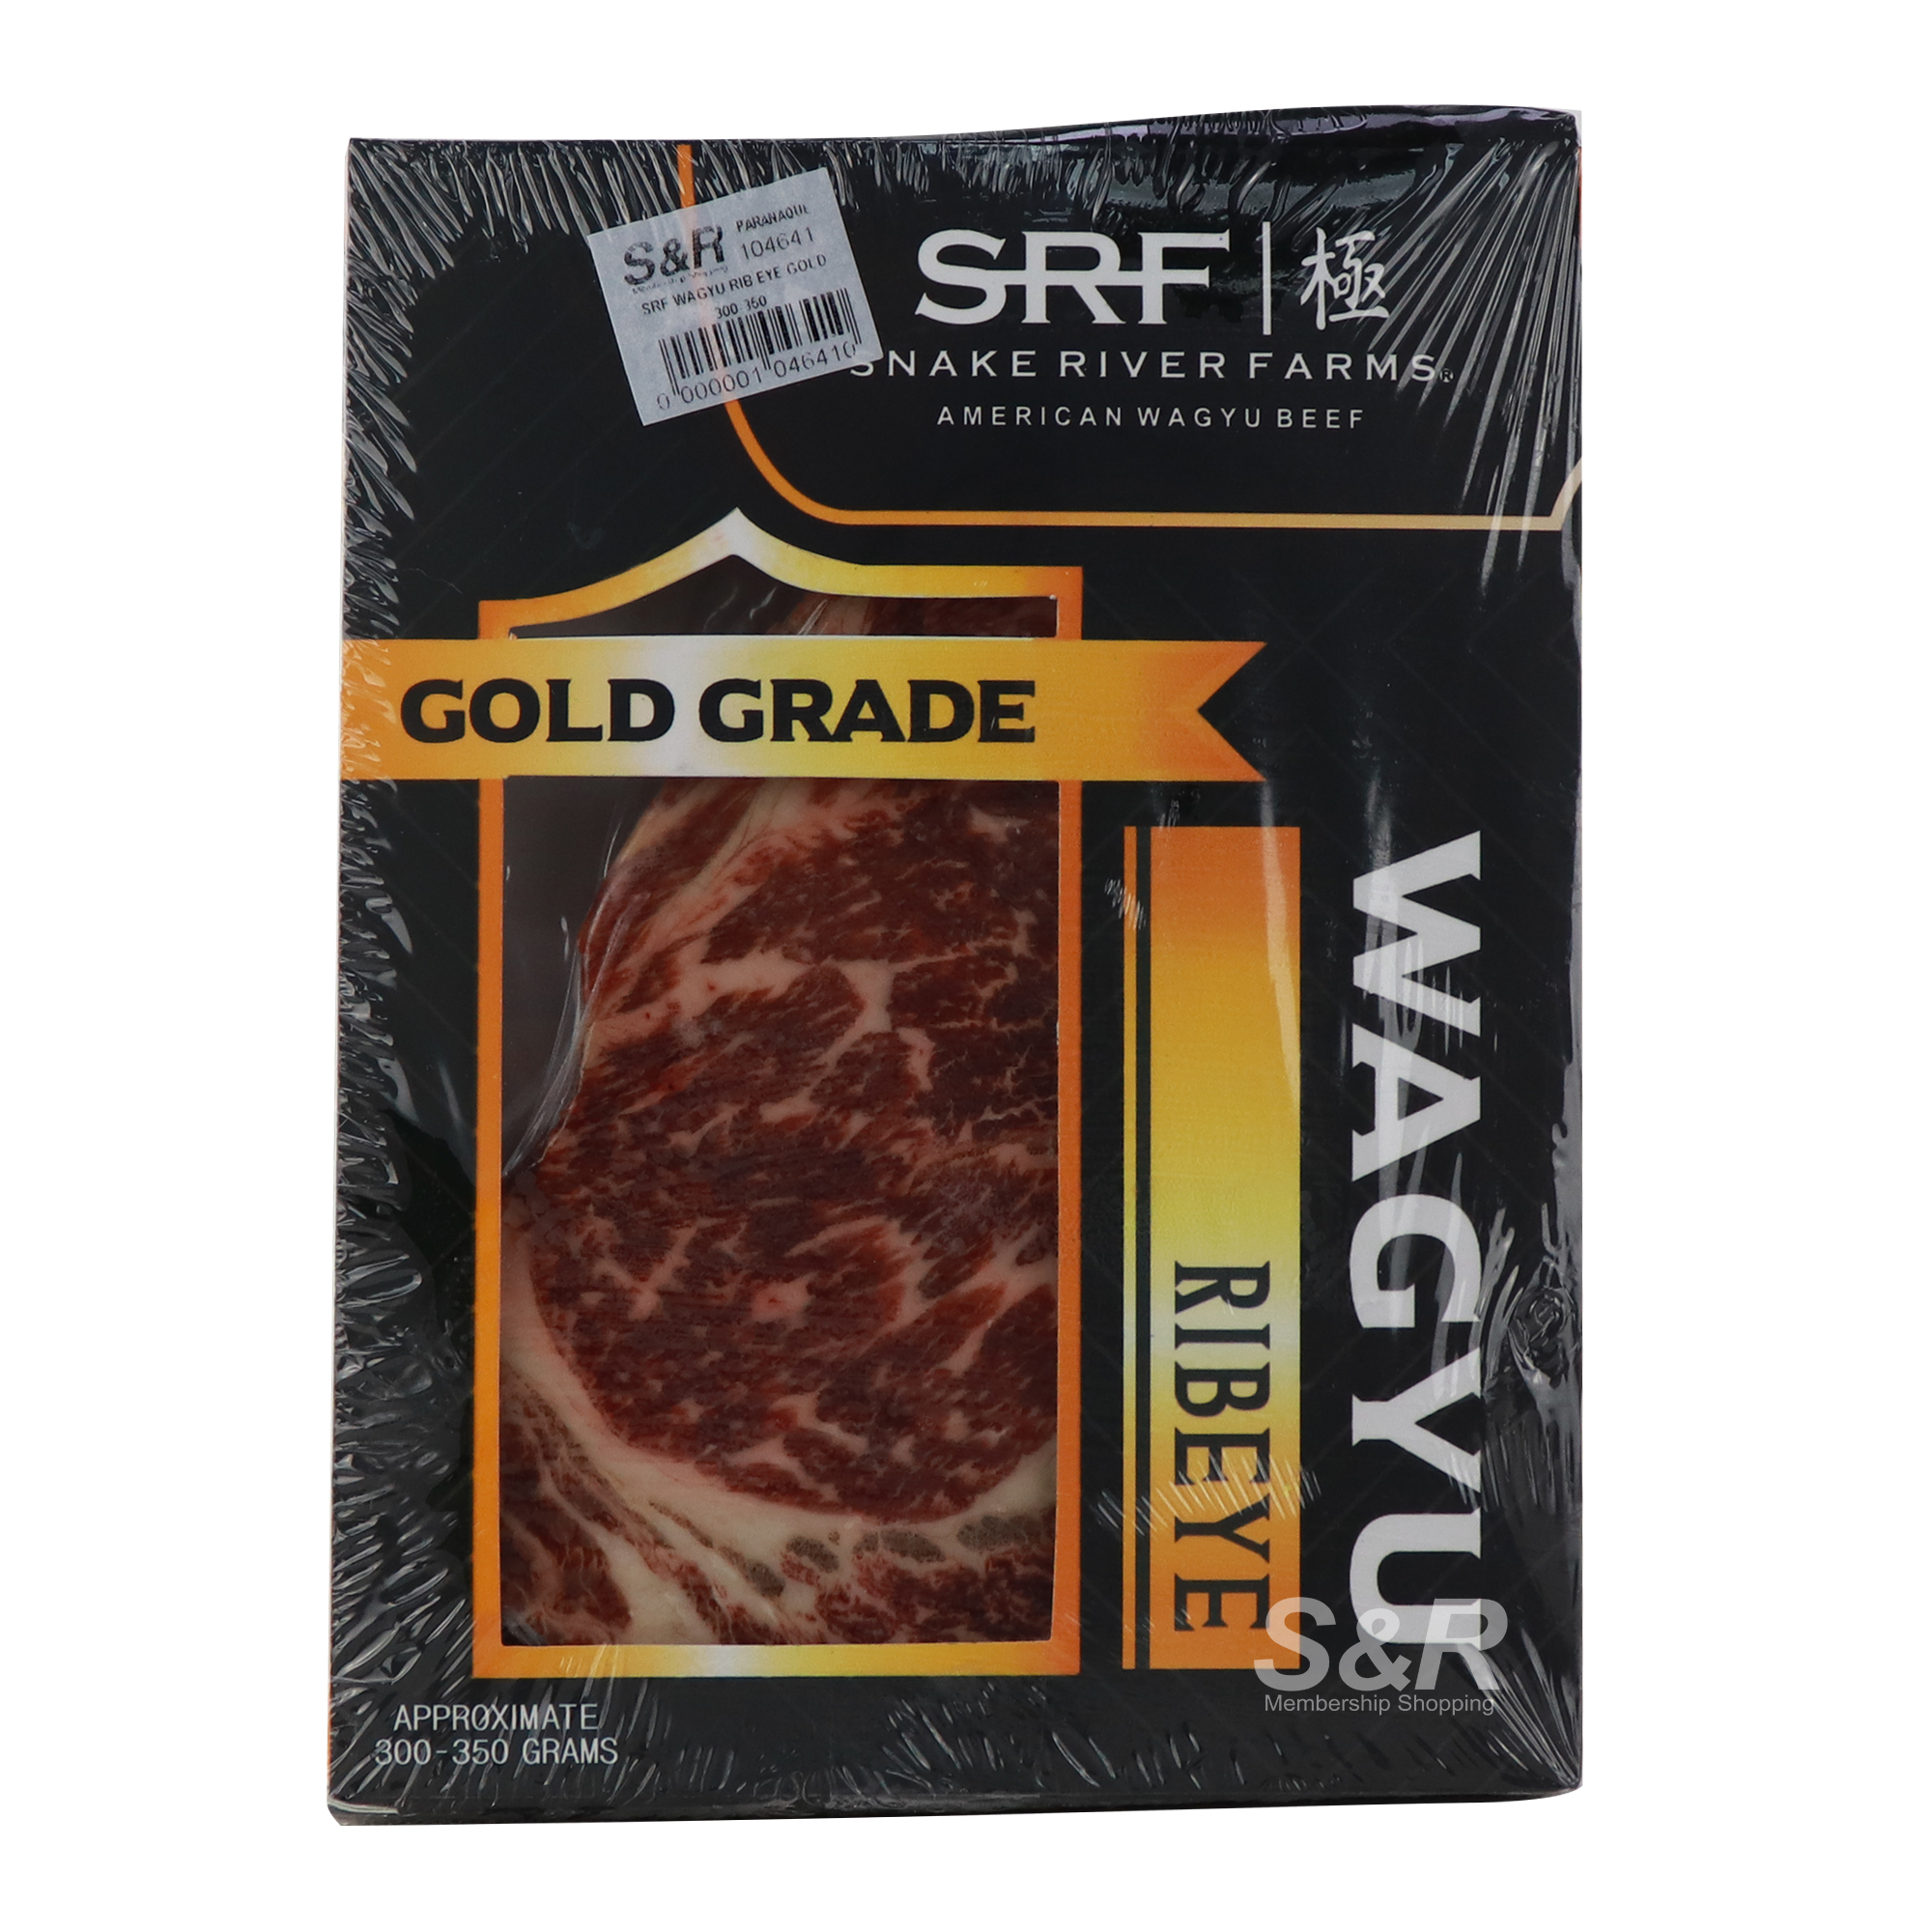 Snakeriver Farms American Wagyu Beef Ribeye Gold approx. 300-350g